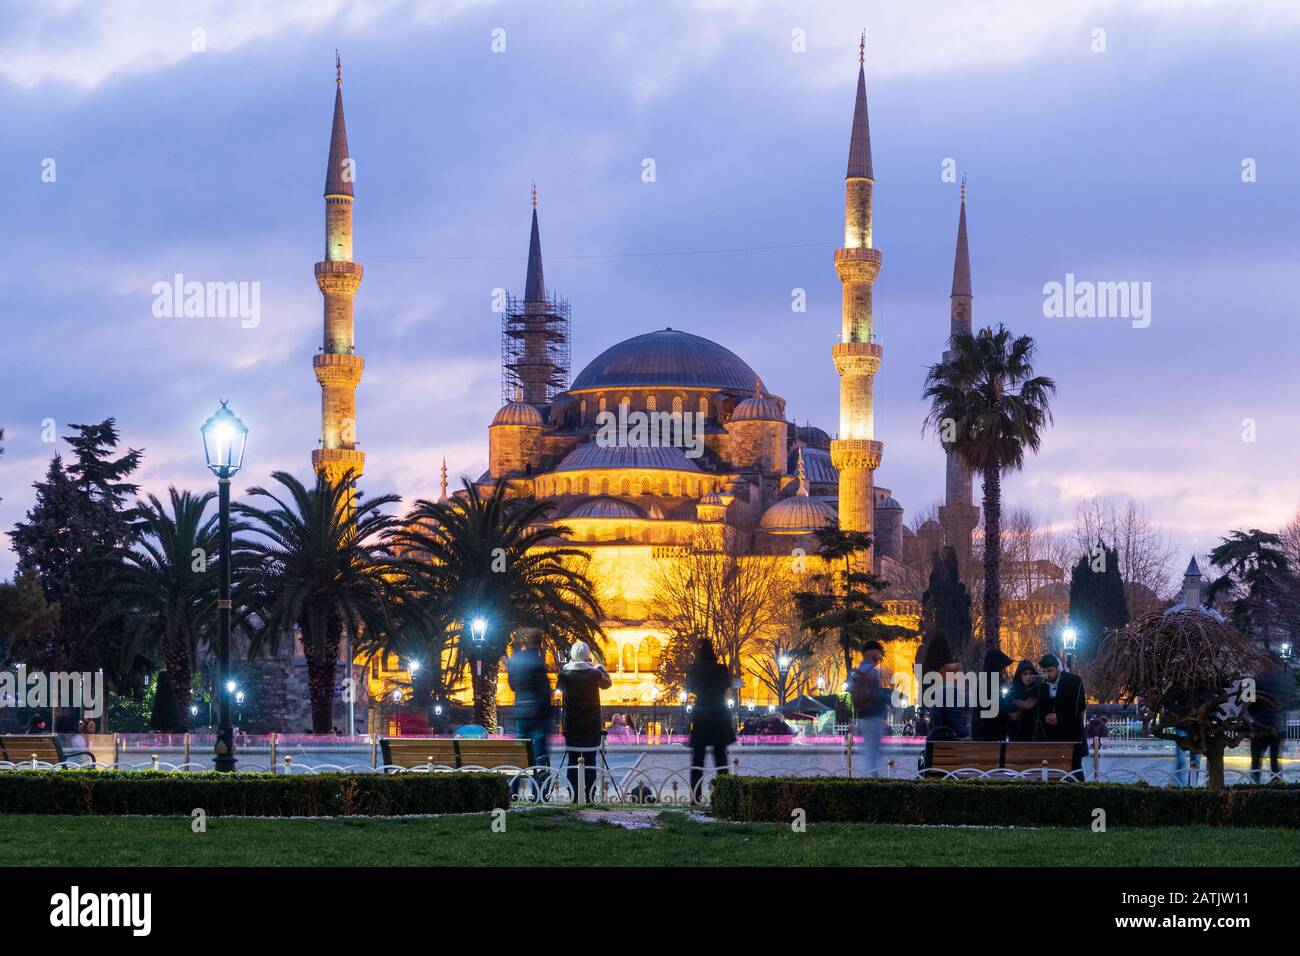 Istanbul, Turkey - Jan 9, 2020: The Sultanahmet District and the Blue Mosque in Istanbul, Turkey Stock Photo